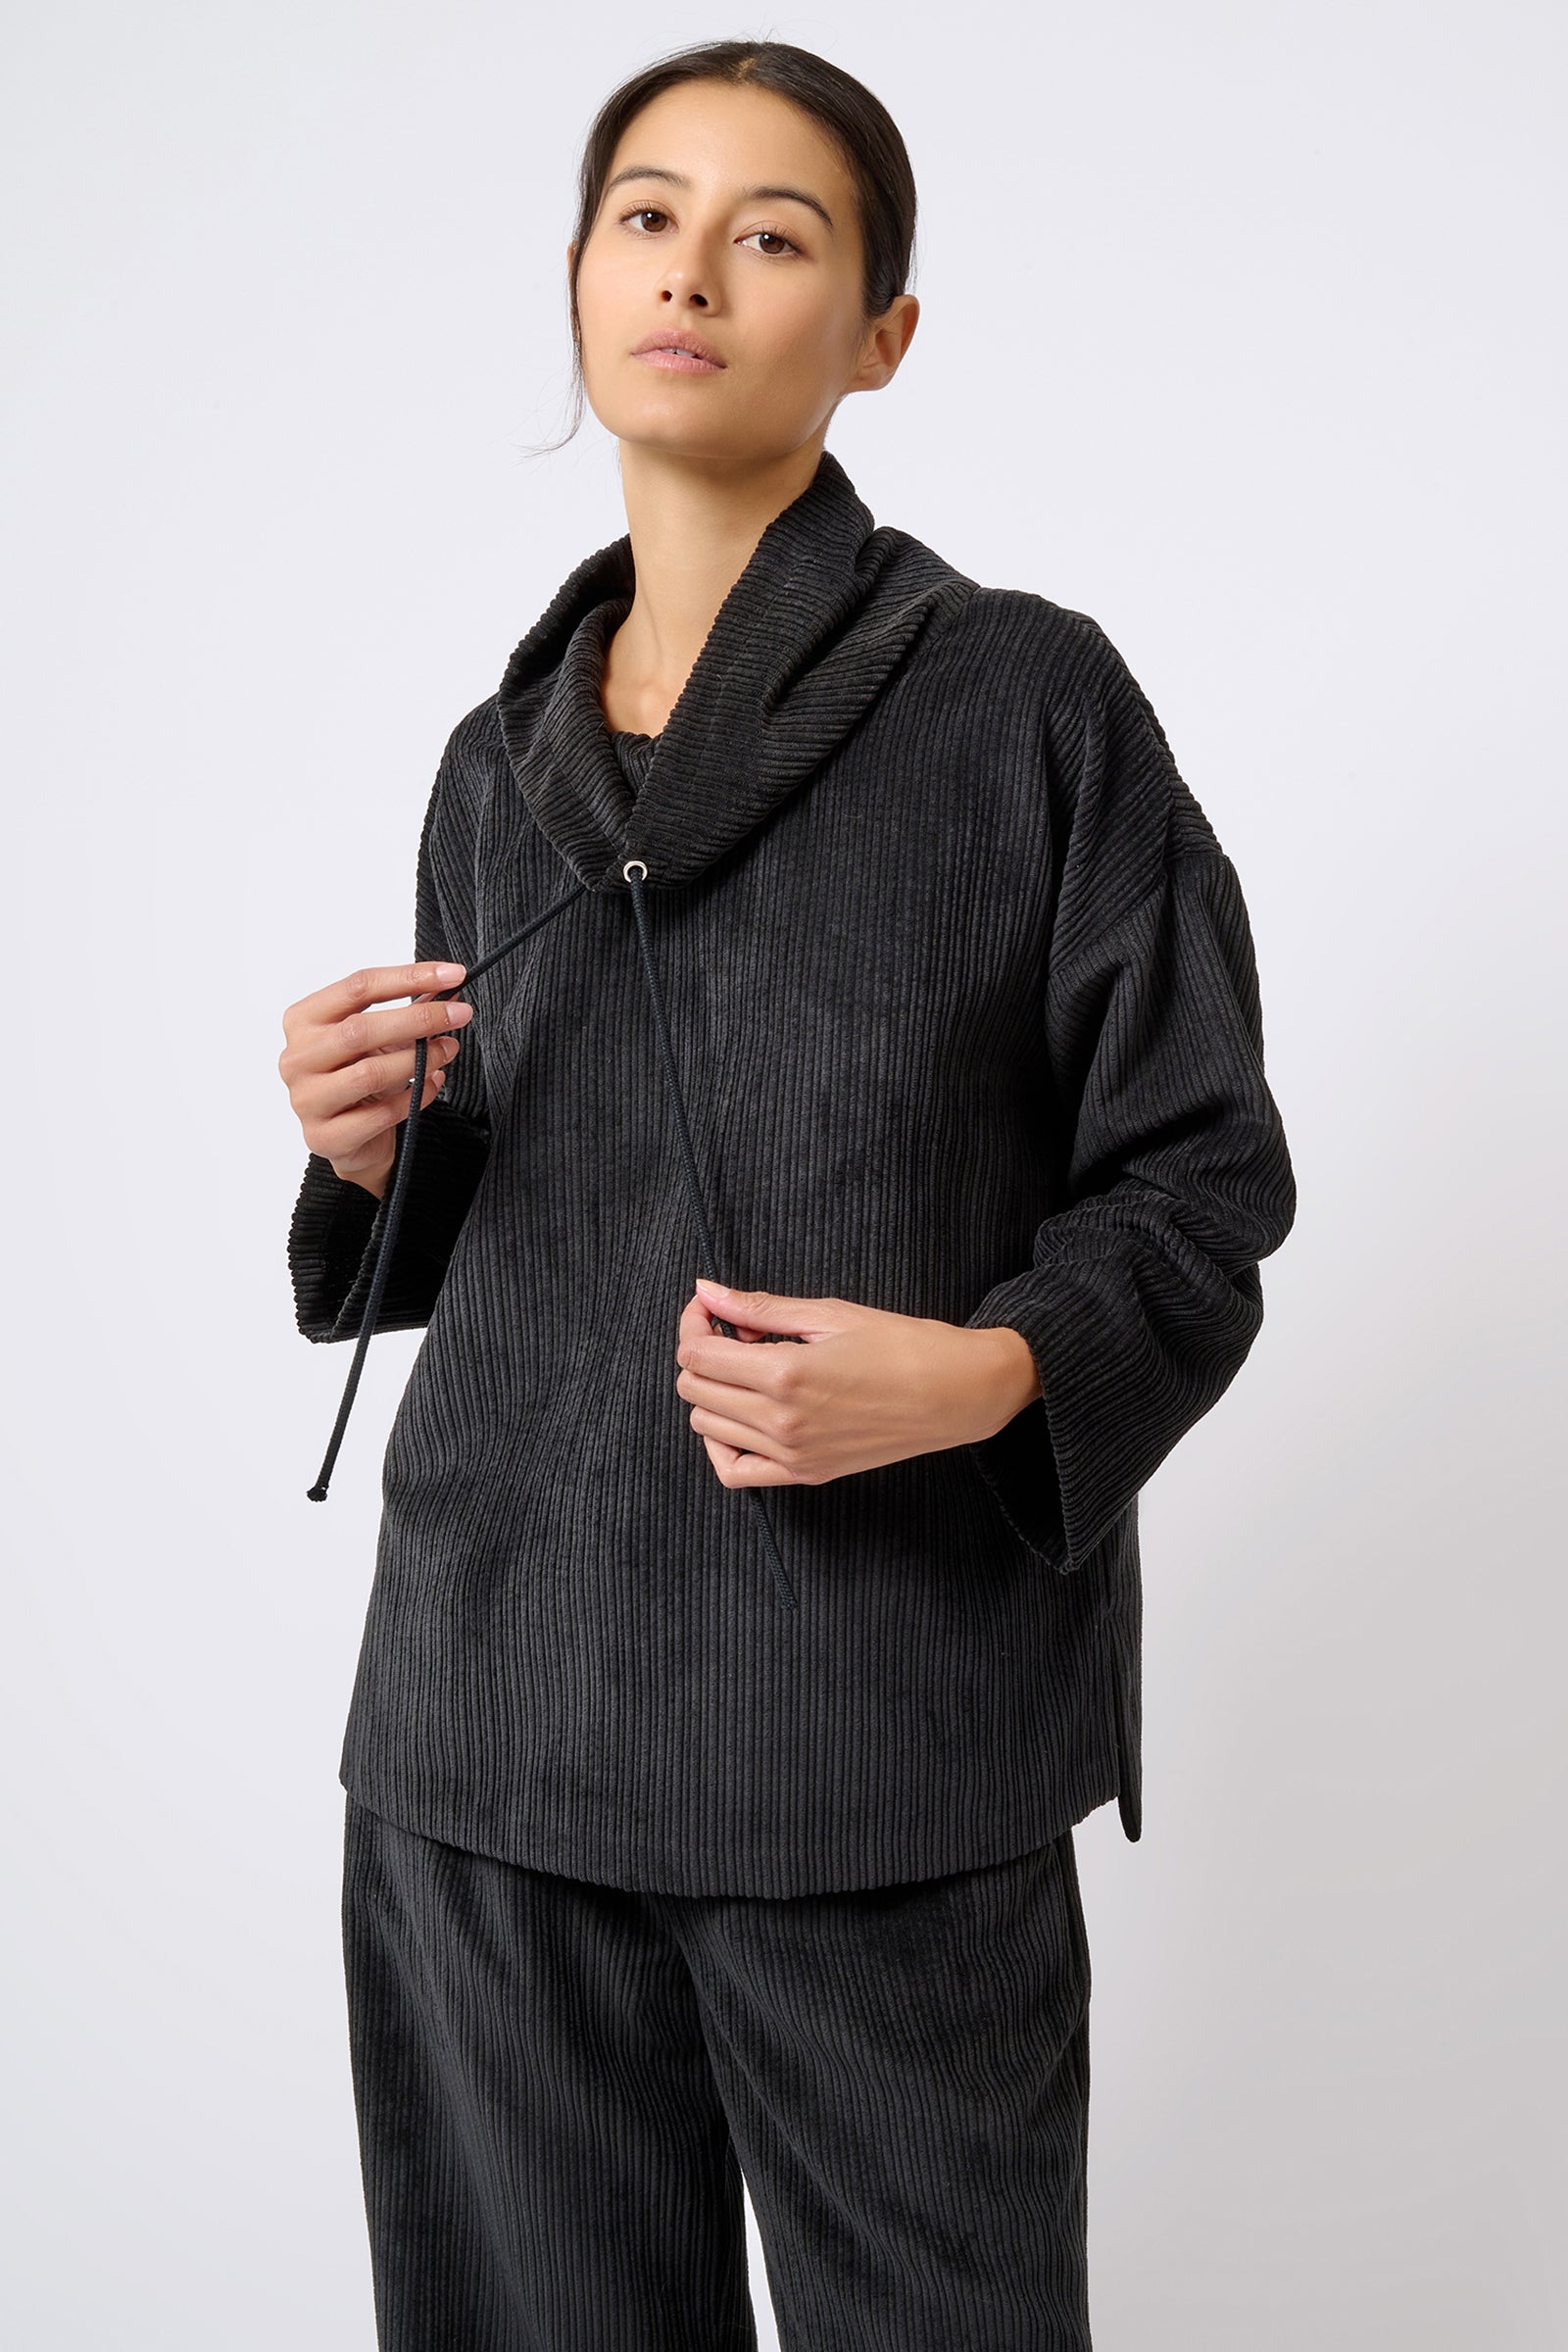 Kal Rieman Debbie Drawstring Pullover in Black on Model with Hand on Drawstring Front View